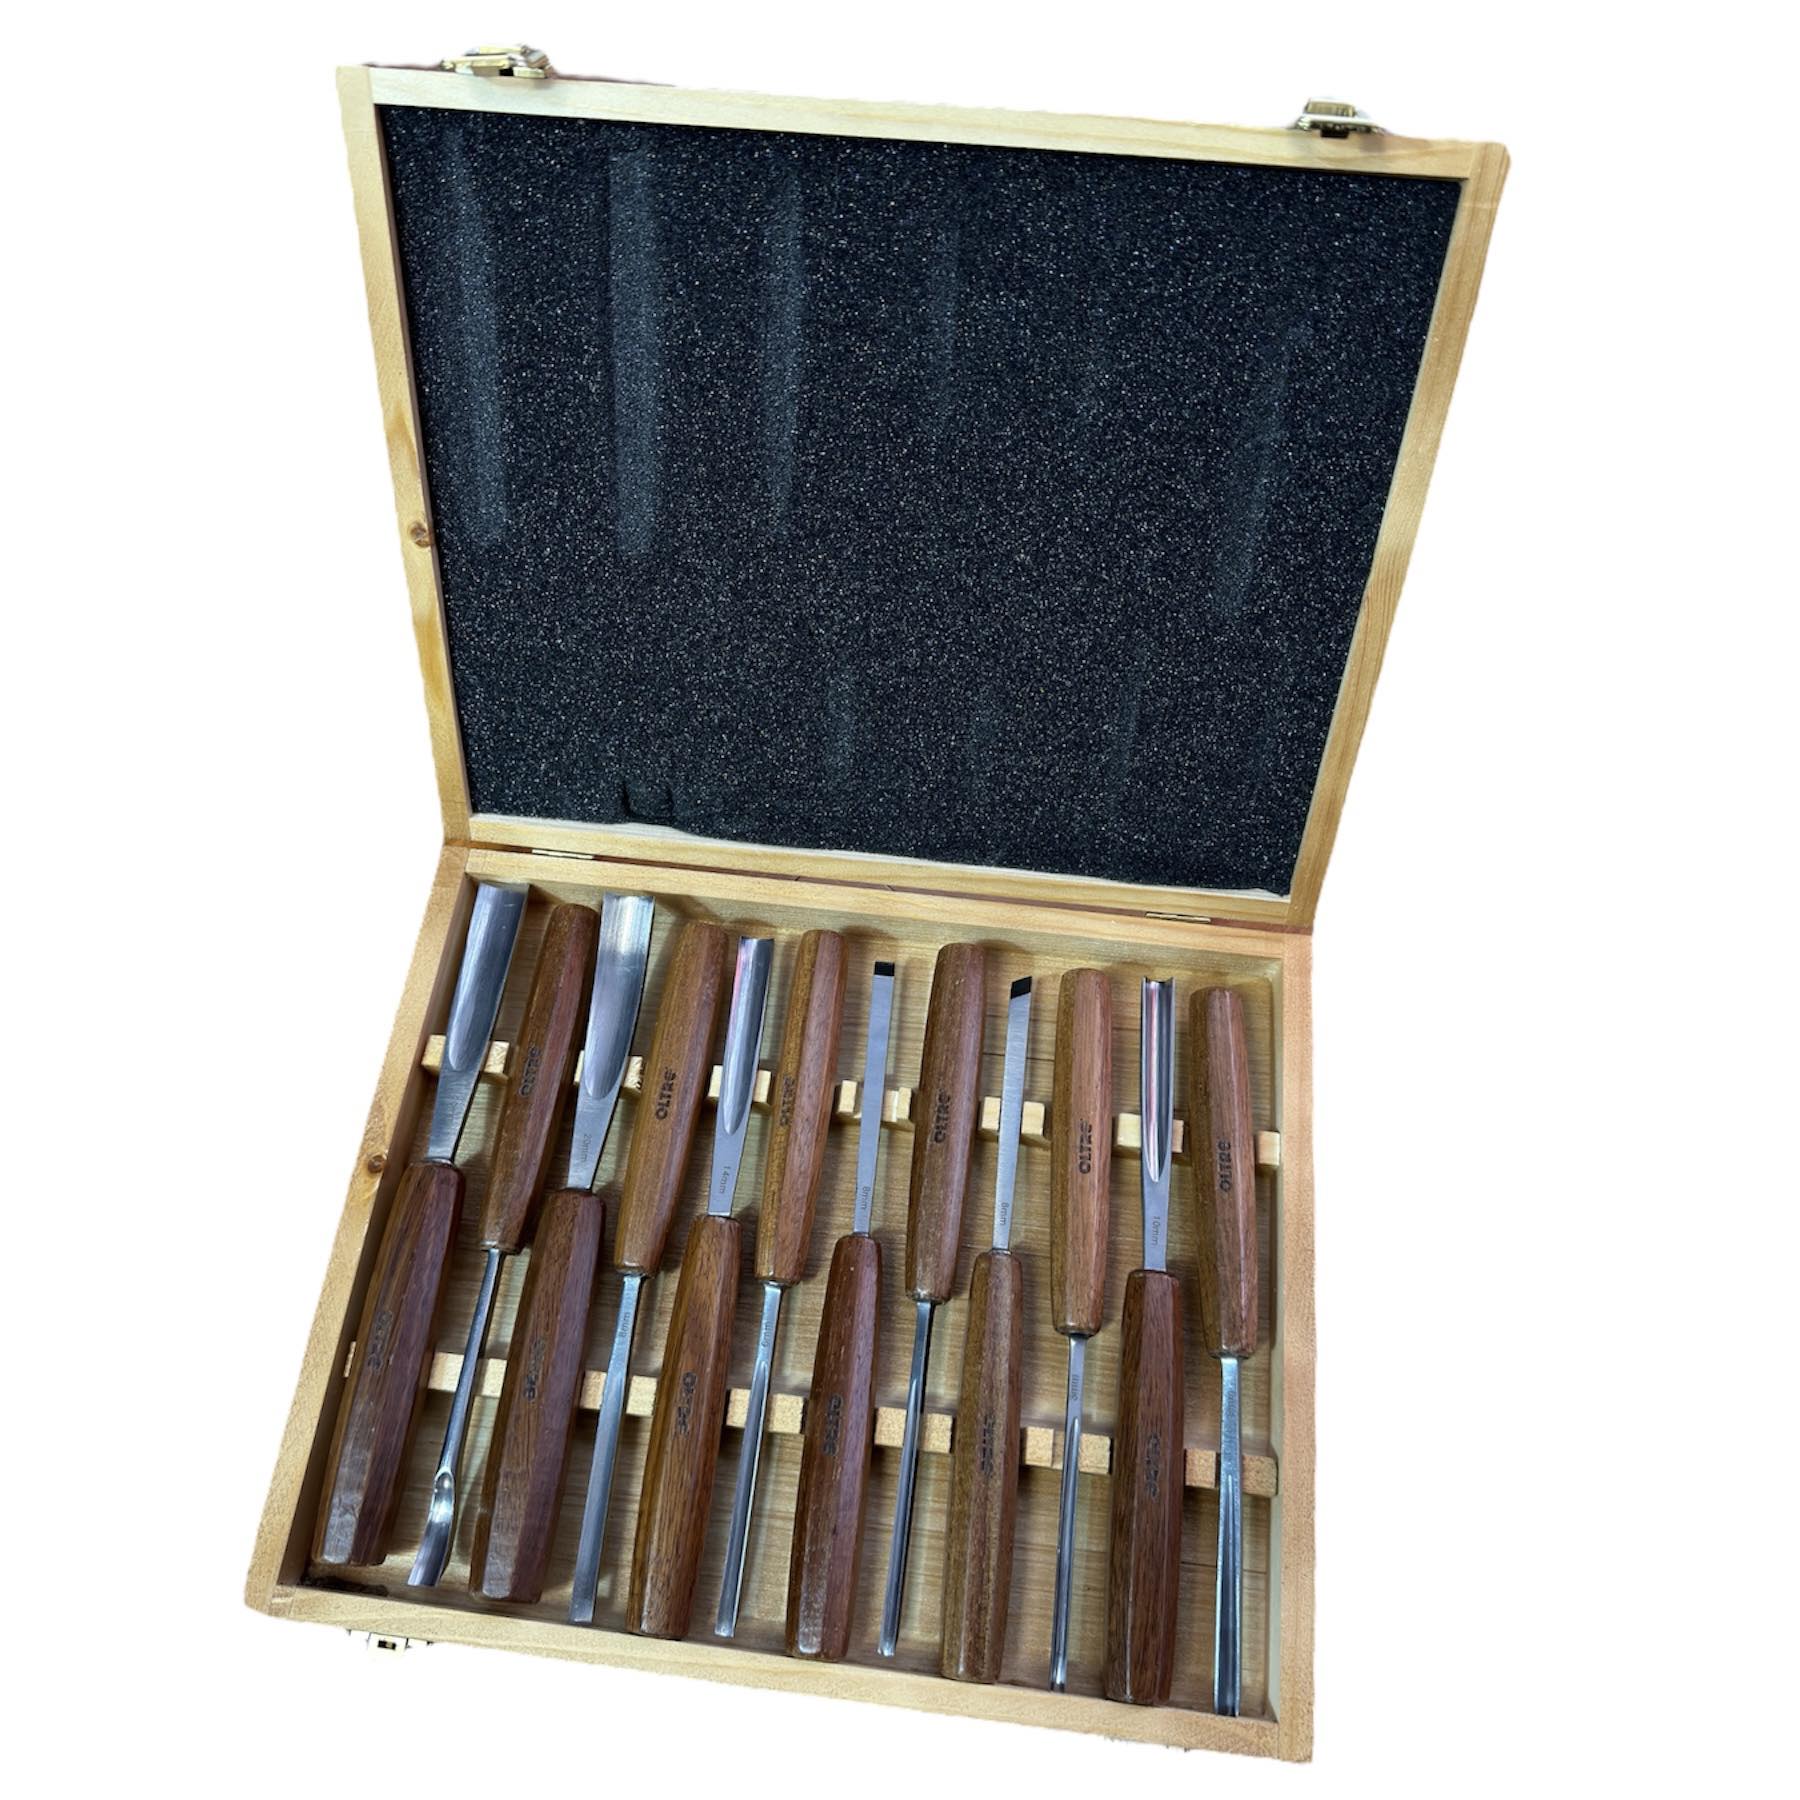 Carving Tool Set 12Pce in Wooden Box OT-CTS-12 by Oltre *New Arrival*